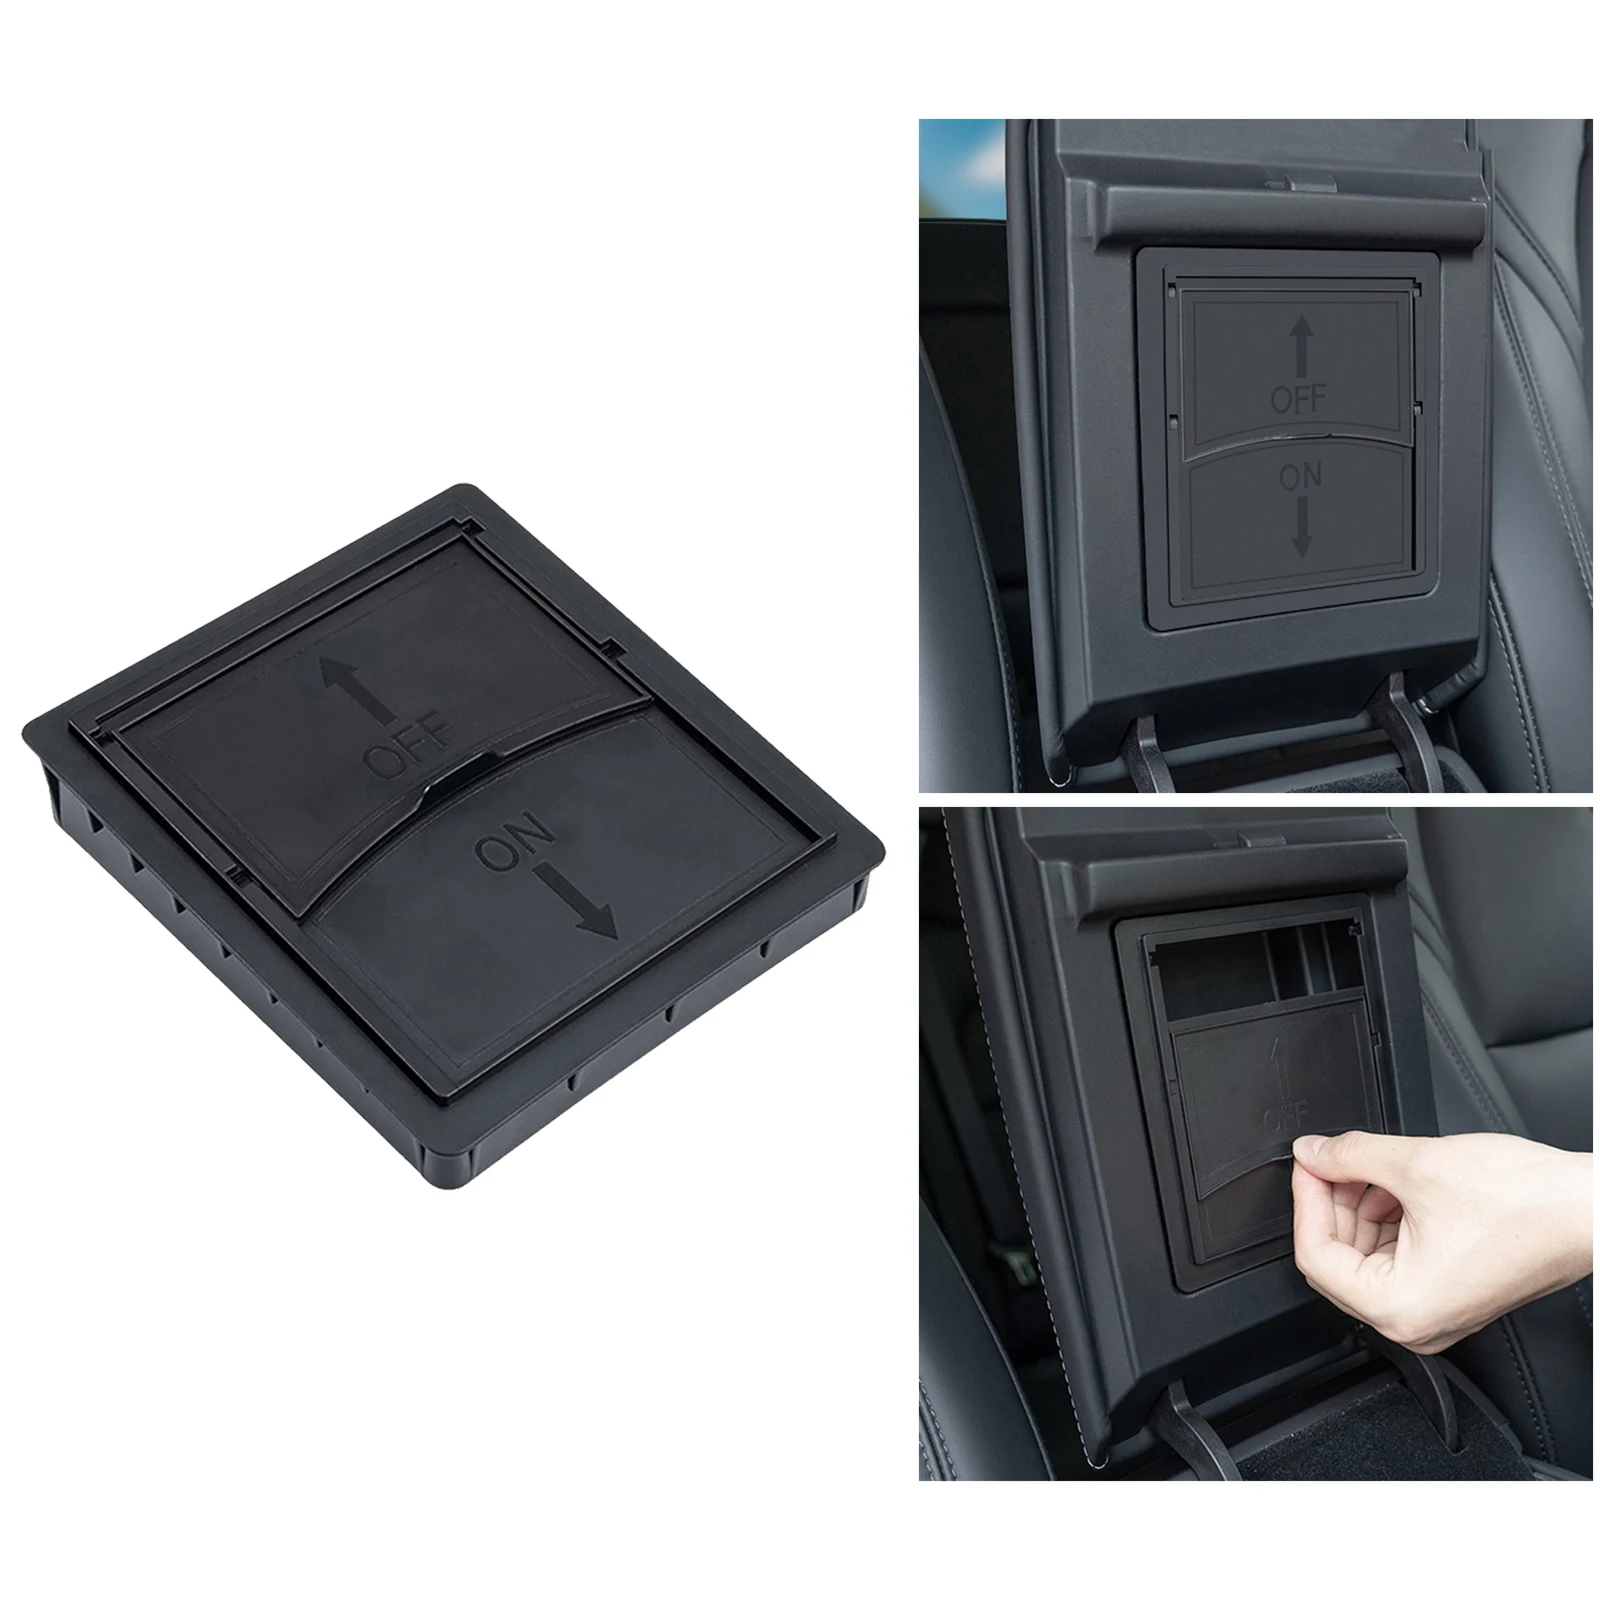 ABS Plastic Interior Center Console Organizer Armrest Easy to Install Car Products Decoration for Tesla Model 3 Y 2017-2021